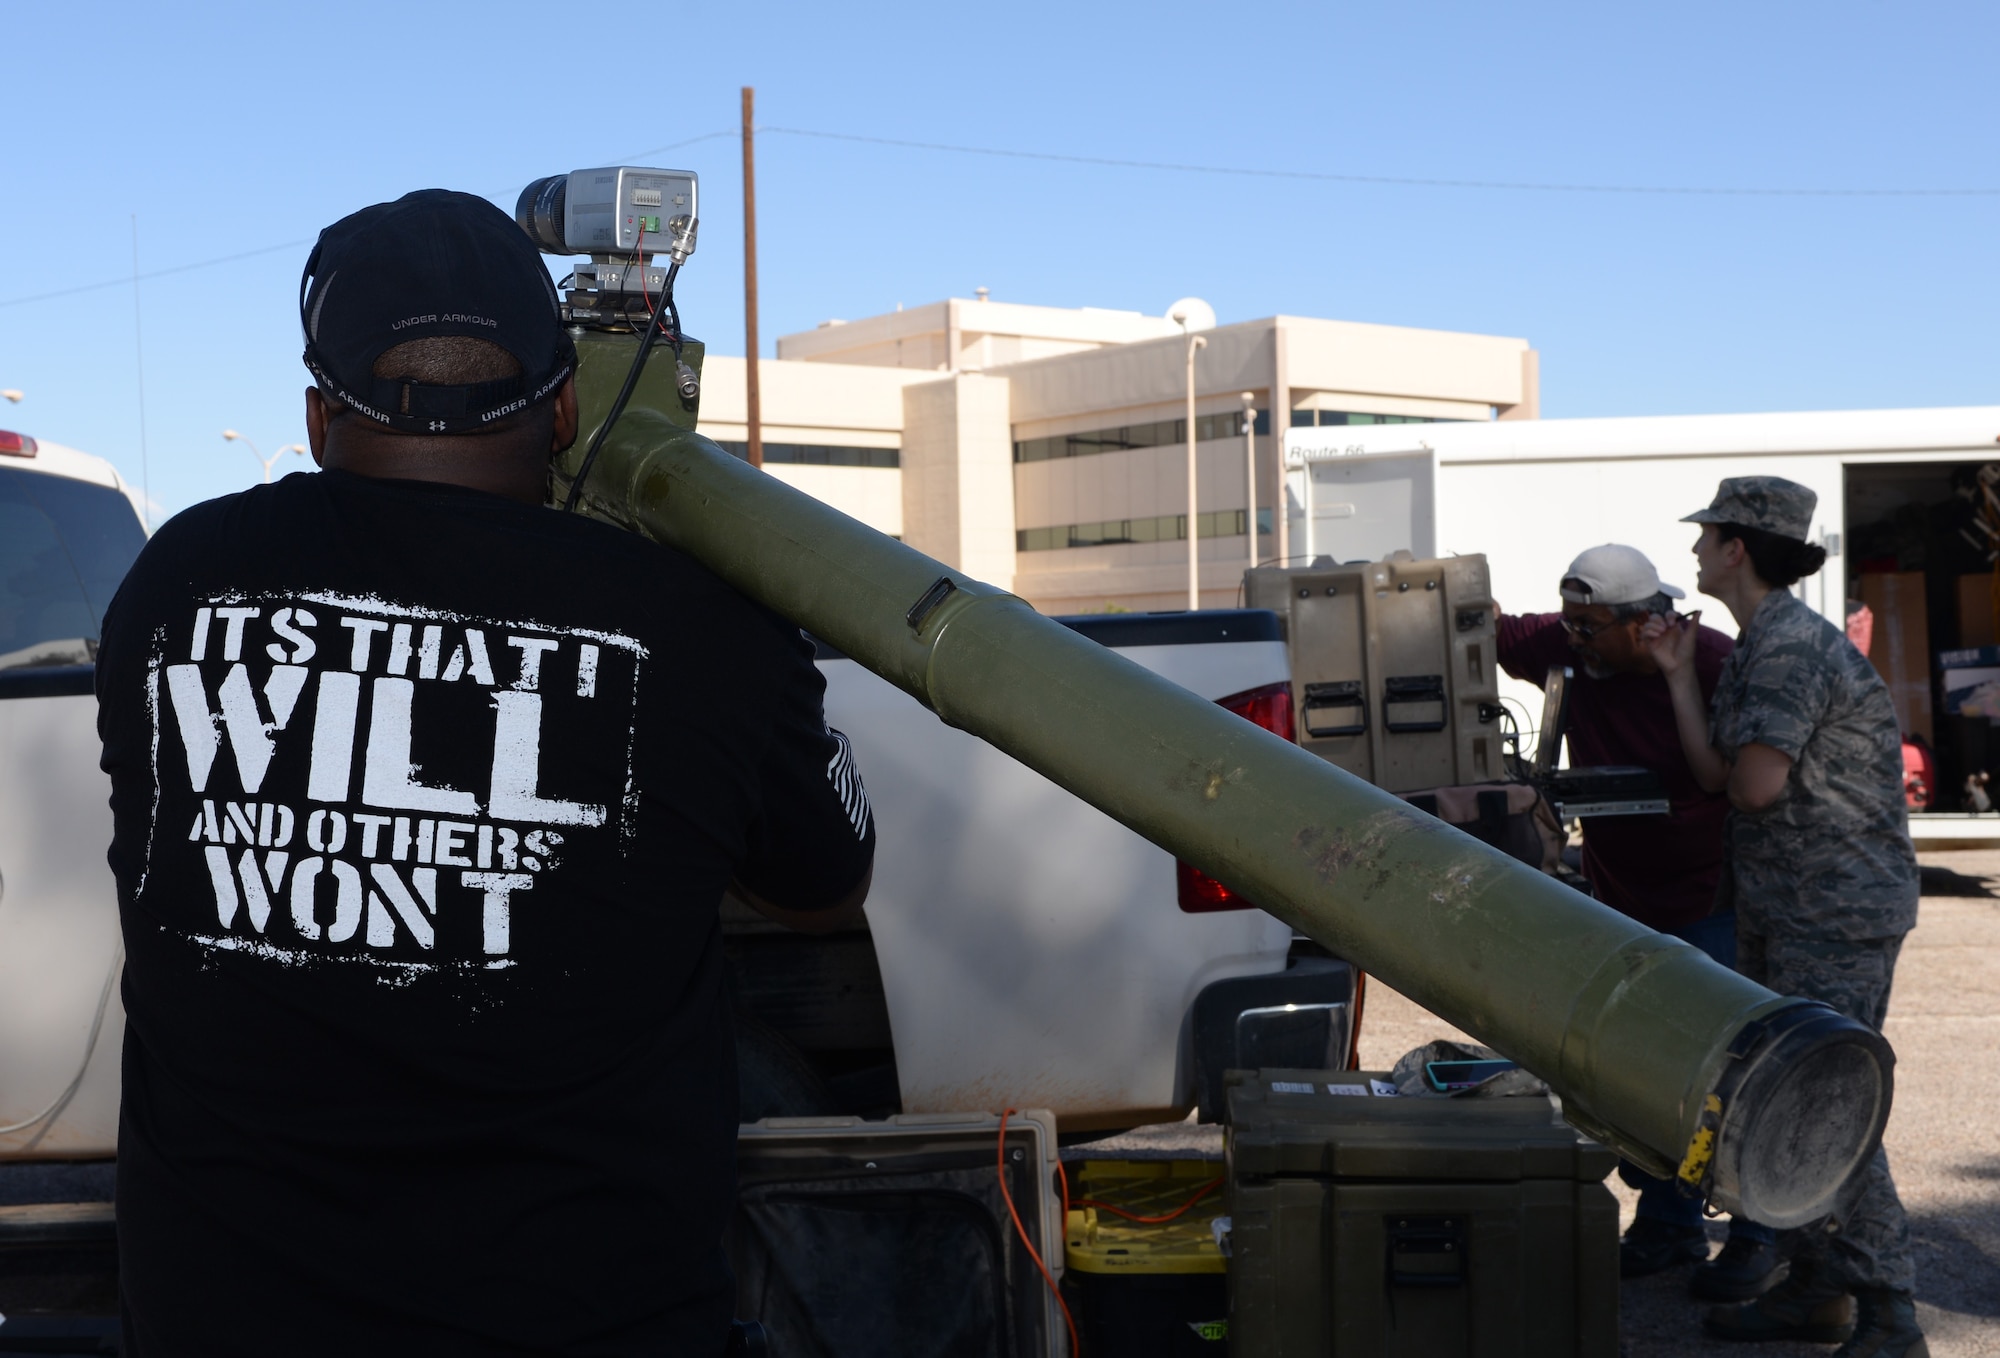 Tony Rankins, program manager for the Warfighter Integration Office at the Center for Countermeasures, aims a man-portable air-defense system (MANPADS) during Red Flag 16-3 on Nellis Air Force Base, Nev., July 18, 2016. MANPADS can attain a speed of about twice the speed of sound and strike aircraft flying at altitudes up to approximately 15,000 feet. The device is monitored through a separate computer which calculates the accuracy and trajectory. (U.S. Air Force photo by Senior Airman Kristin High/Released)